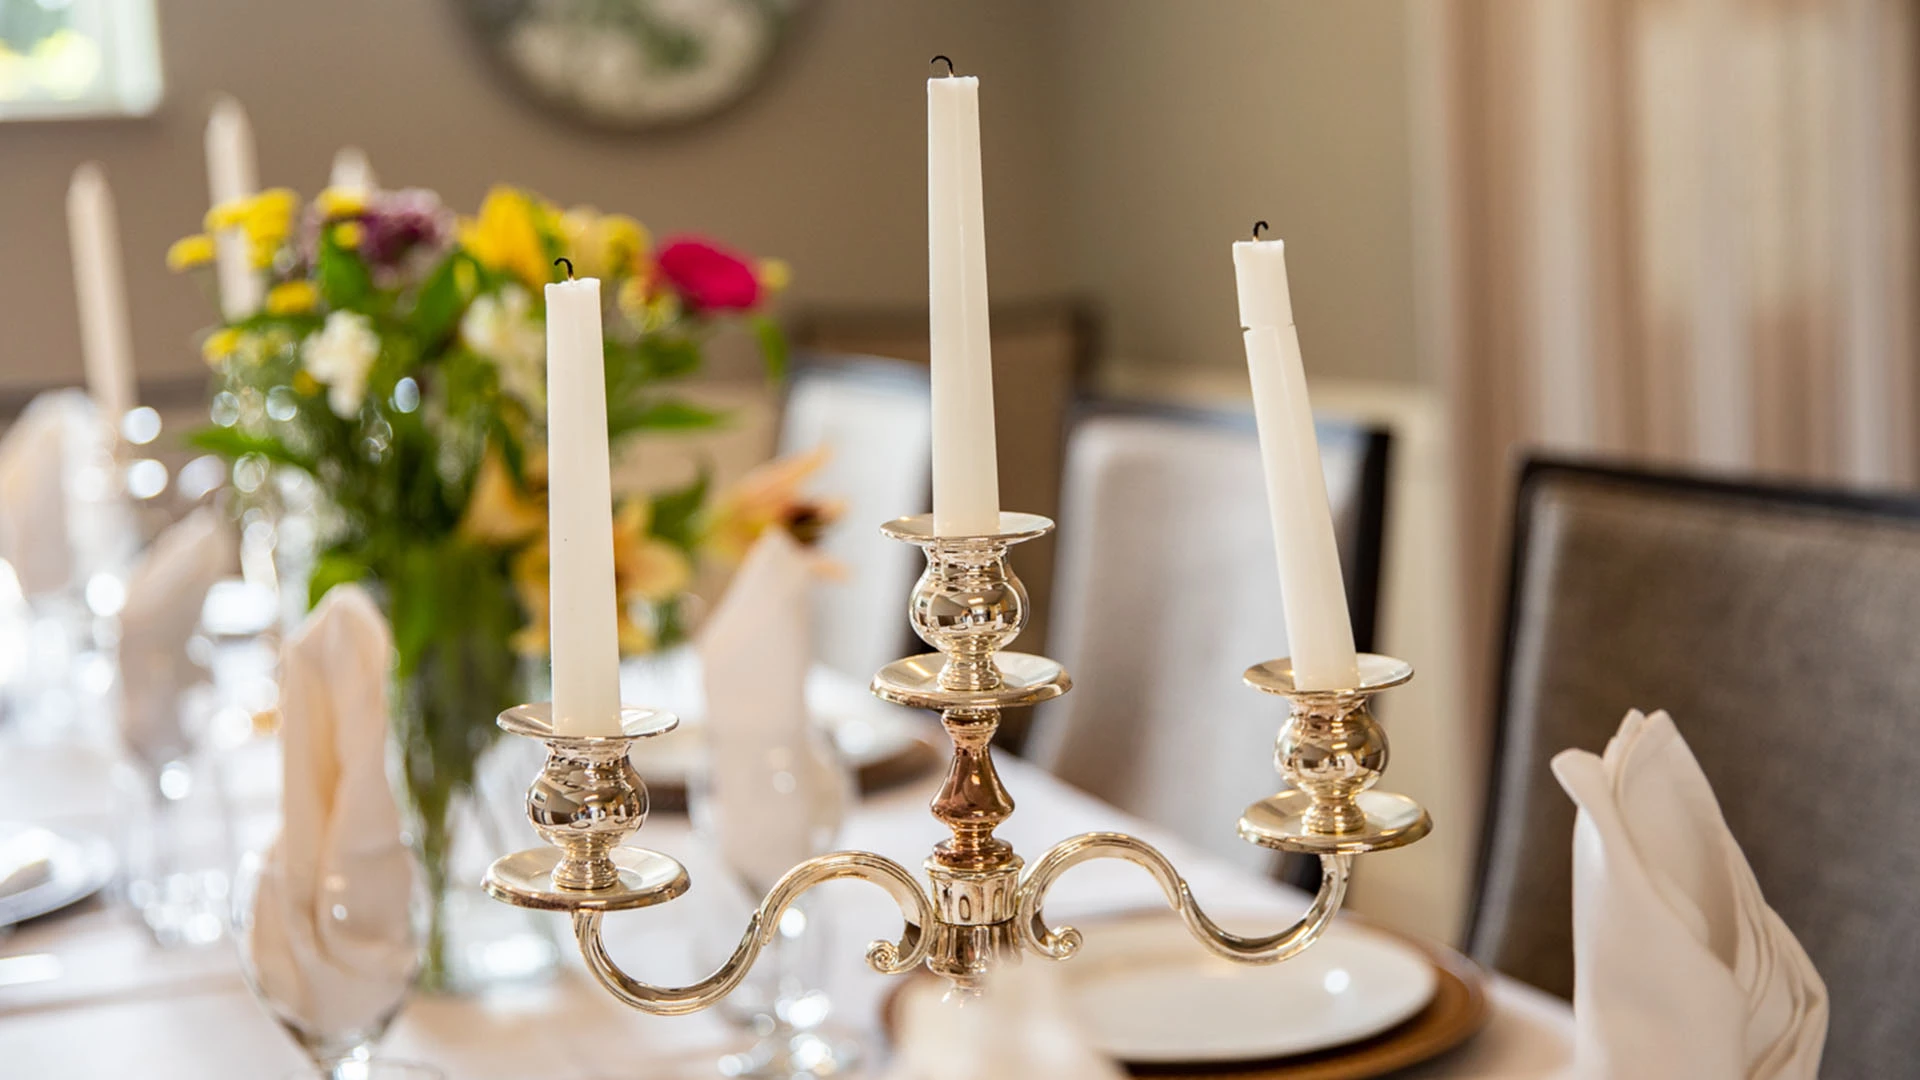 Candles on dining table in senior living communities